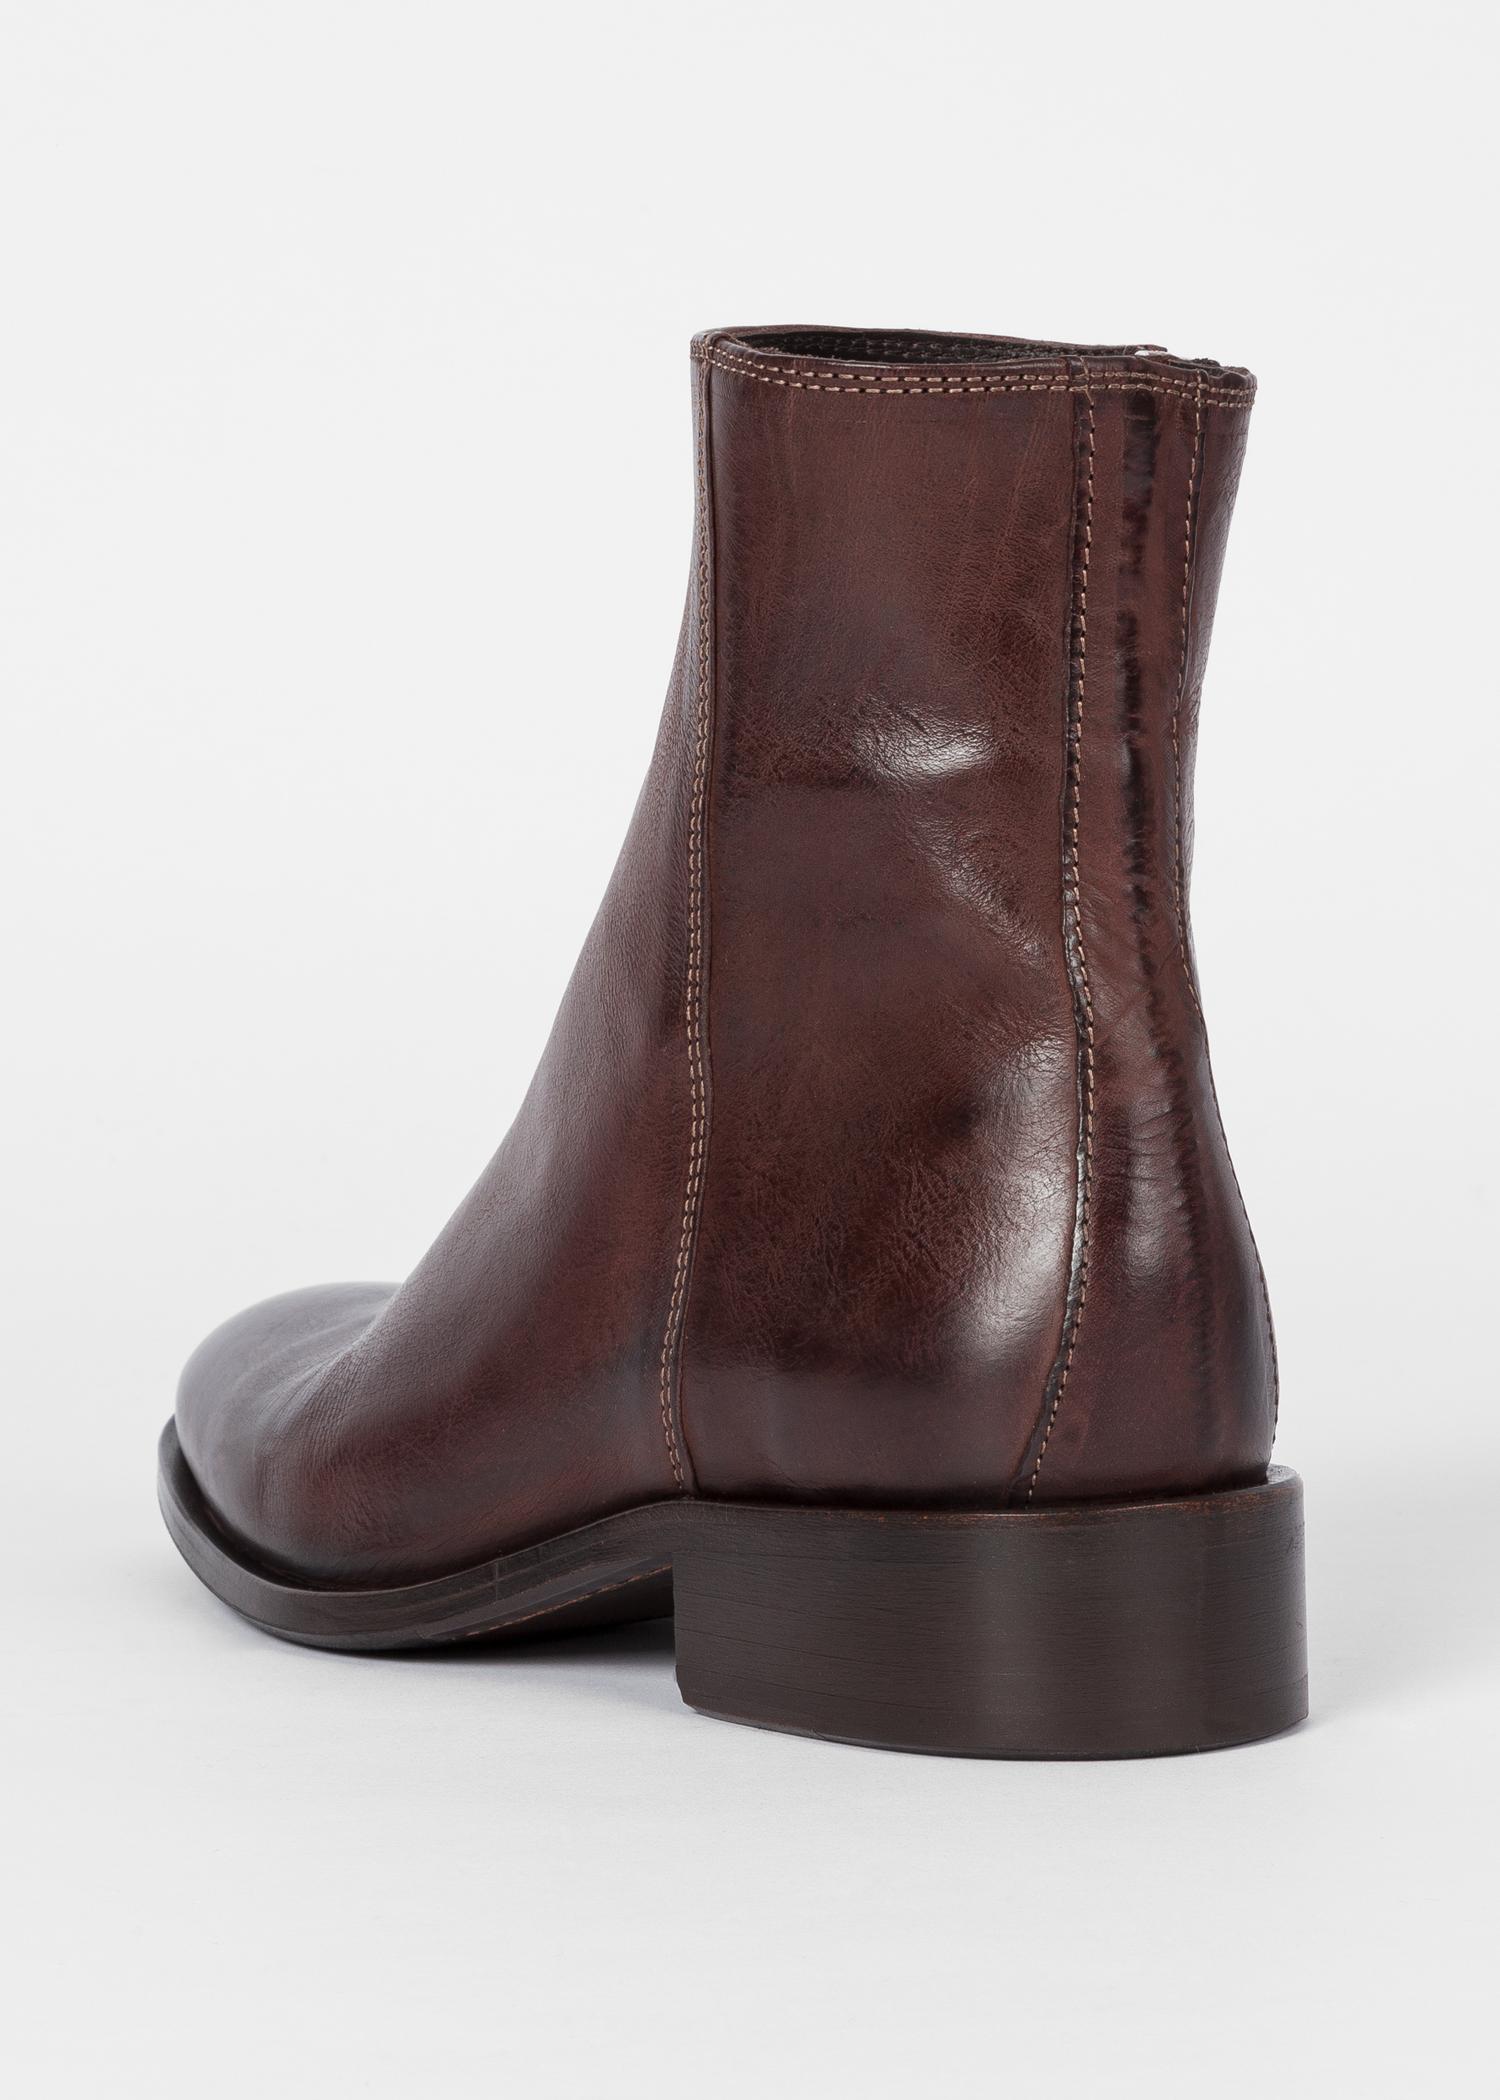 Paul Smith Chocolate Brown Leather 'billy' Zip Boots for Men - Lyst